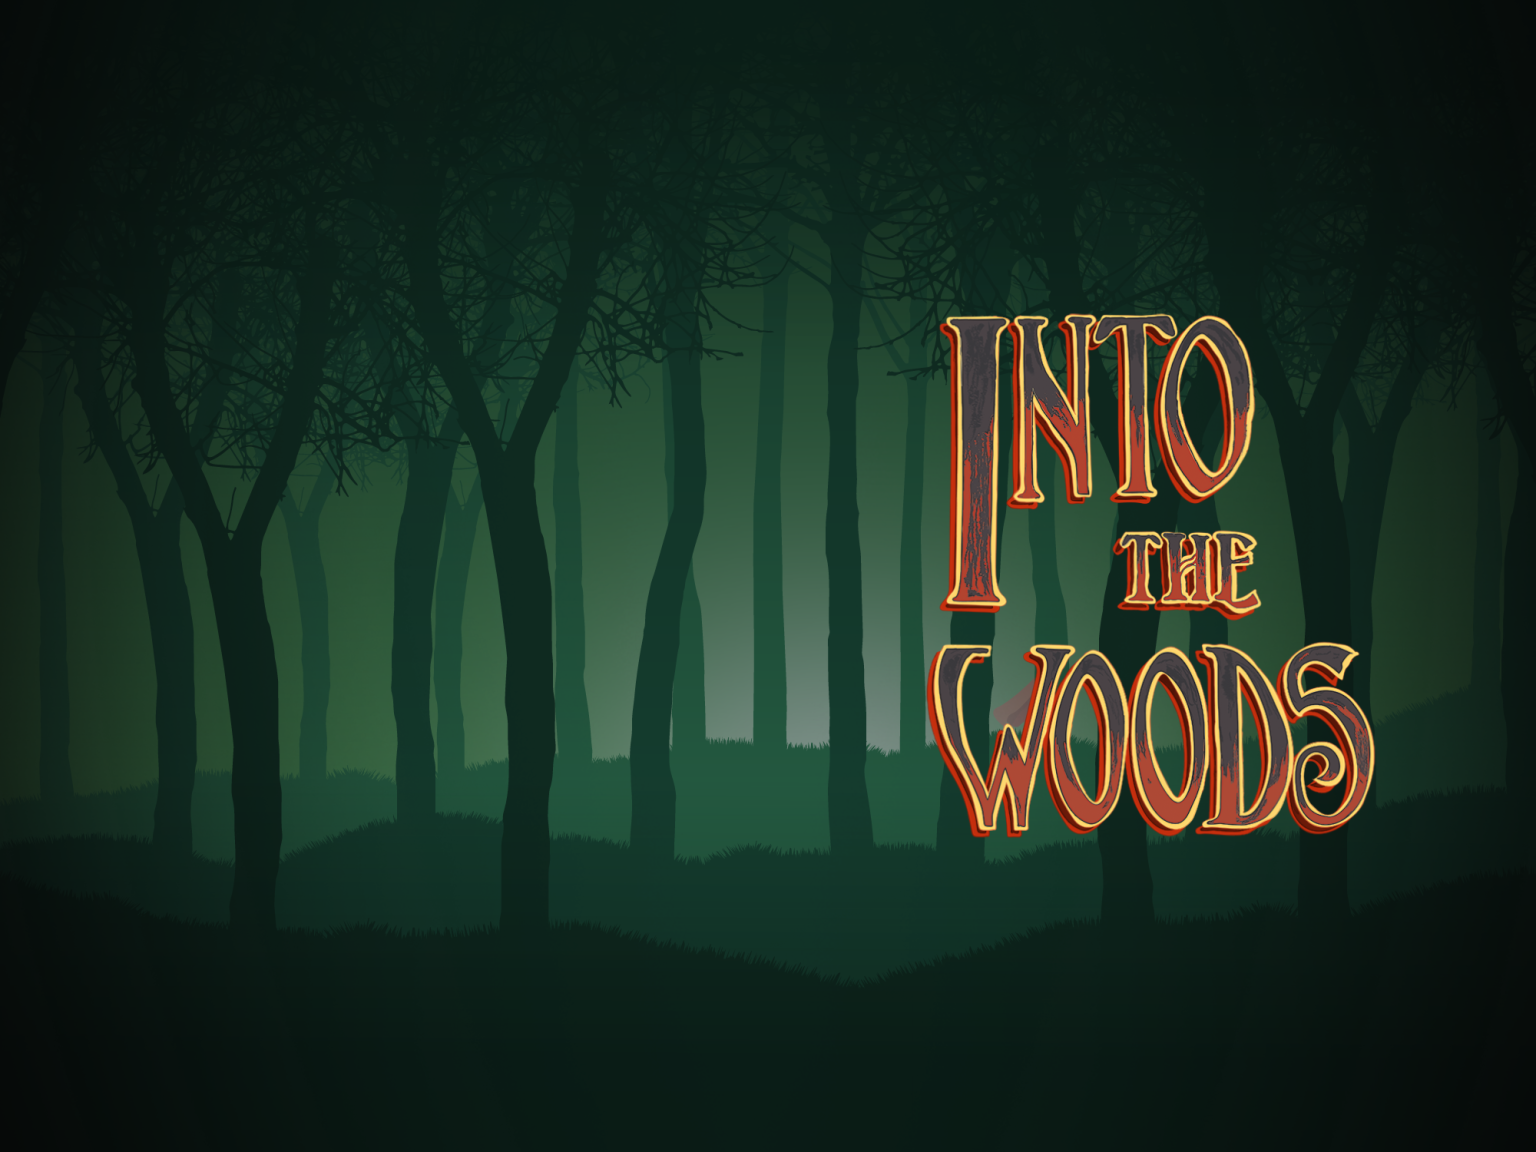 Into the Woods Poster (1080 × 1080 px) (1920 × 1080 px) (600 × 200 px) (2000 × 1500 px) (1)